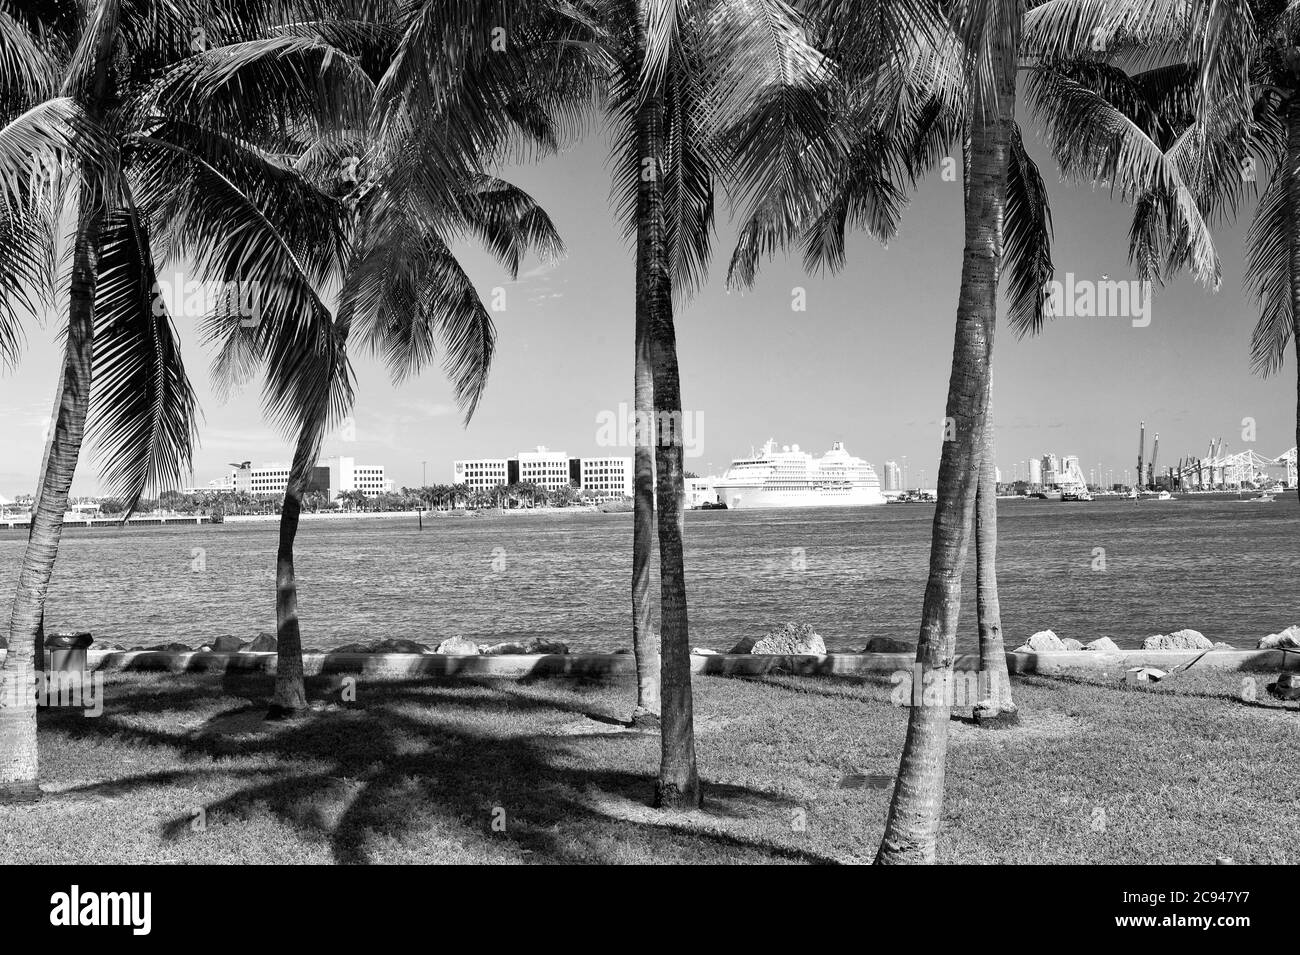 Miami, USA - February 29, 2016: sea view through palm trees. Sea voyage. Cruise ship in port. Holiday in tropical beach. Travelling and travel. Wanderlust. Summer vacation. Stock Photo